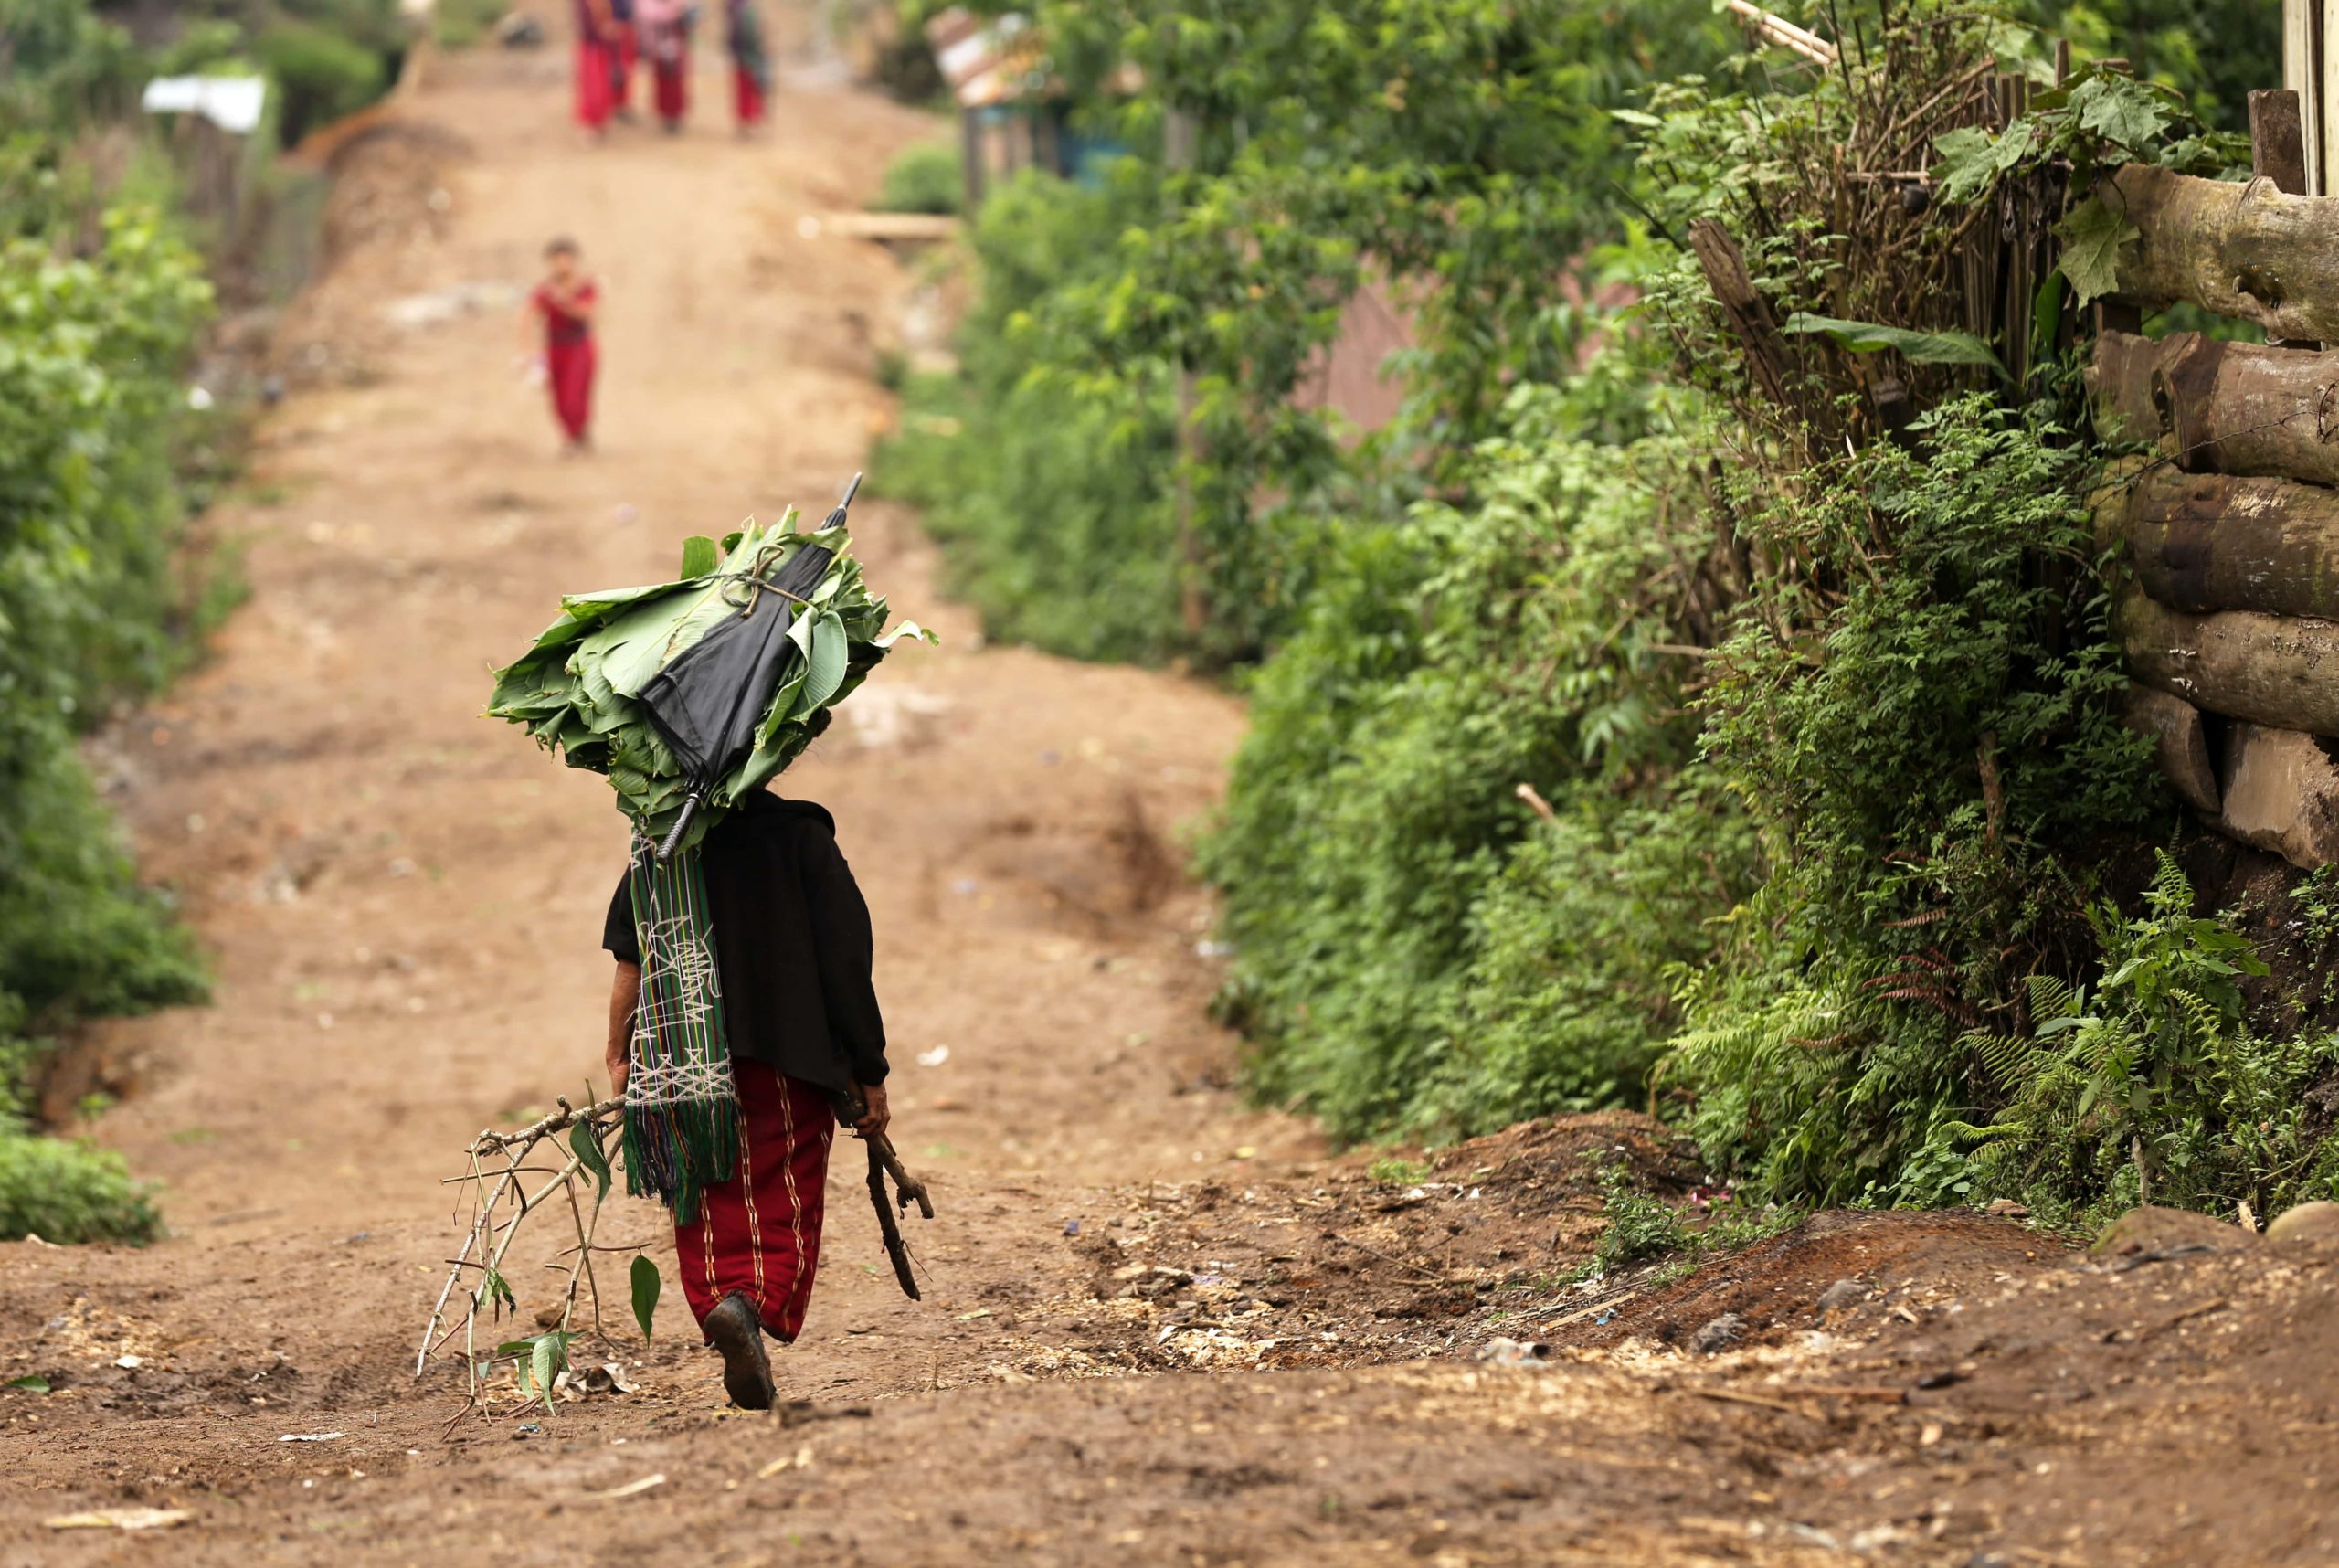 A community member in Guatemala walks down a dirt path carrying leaves and branches.